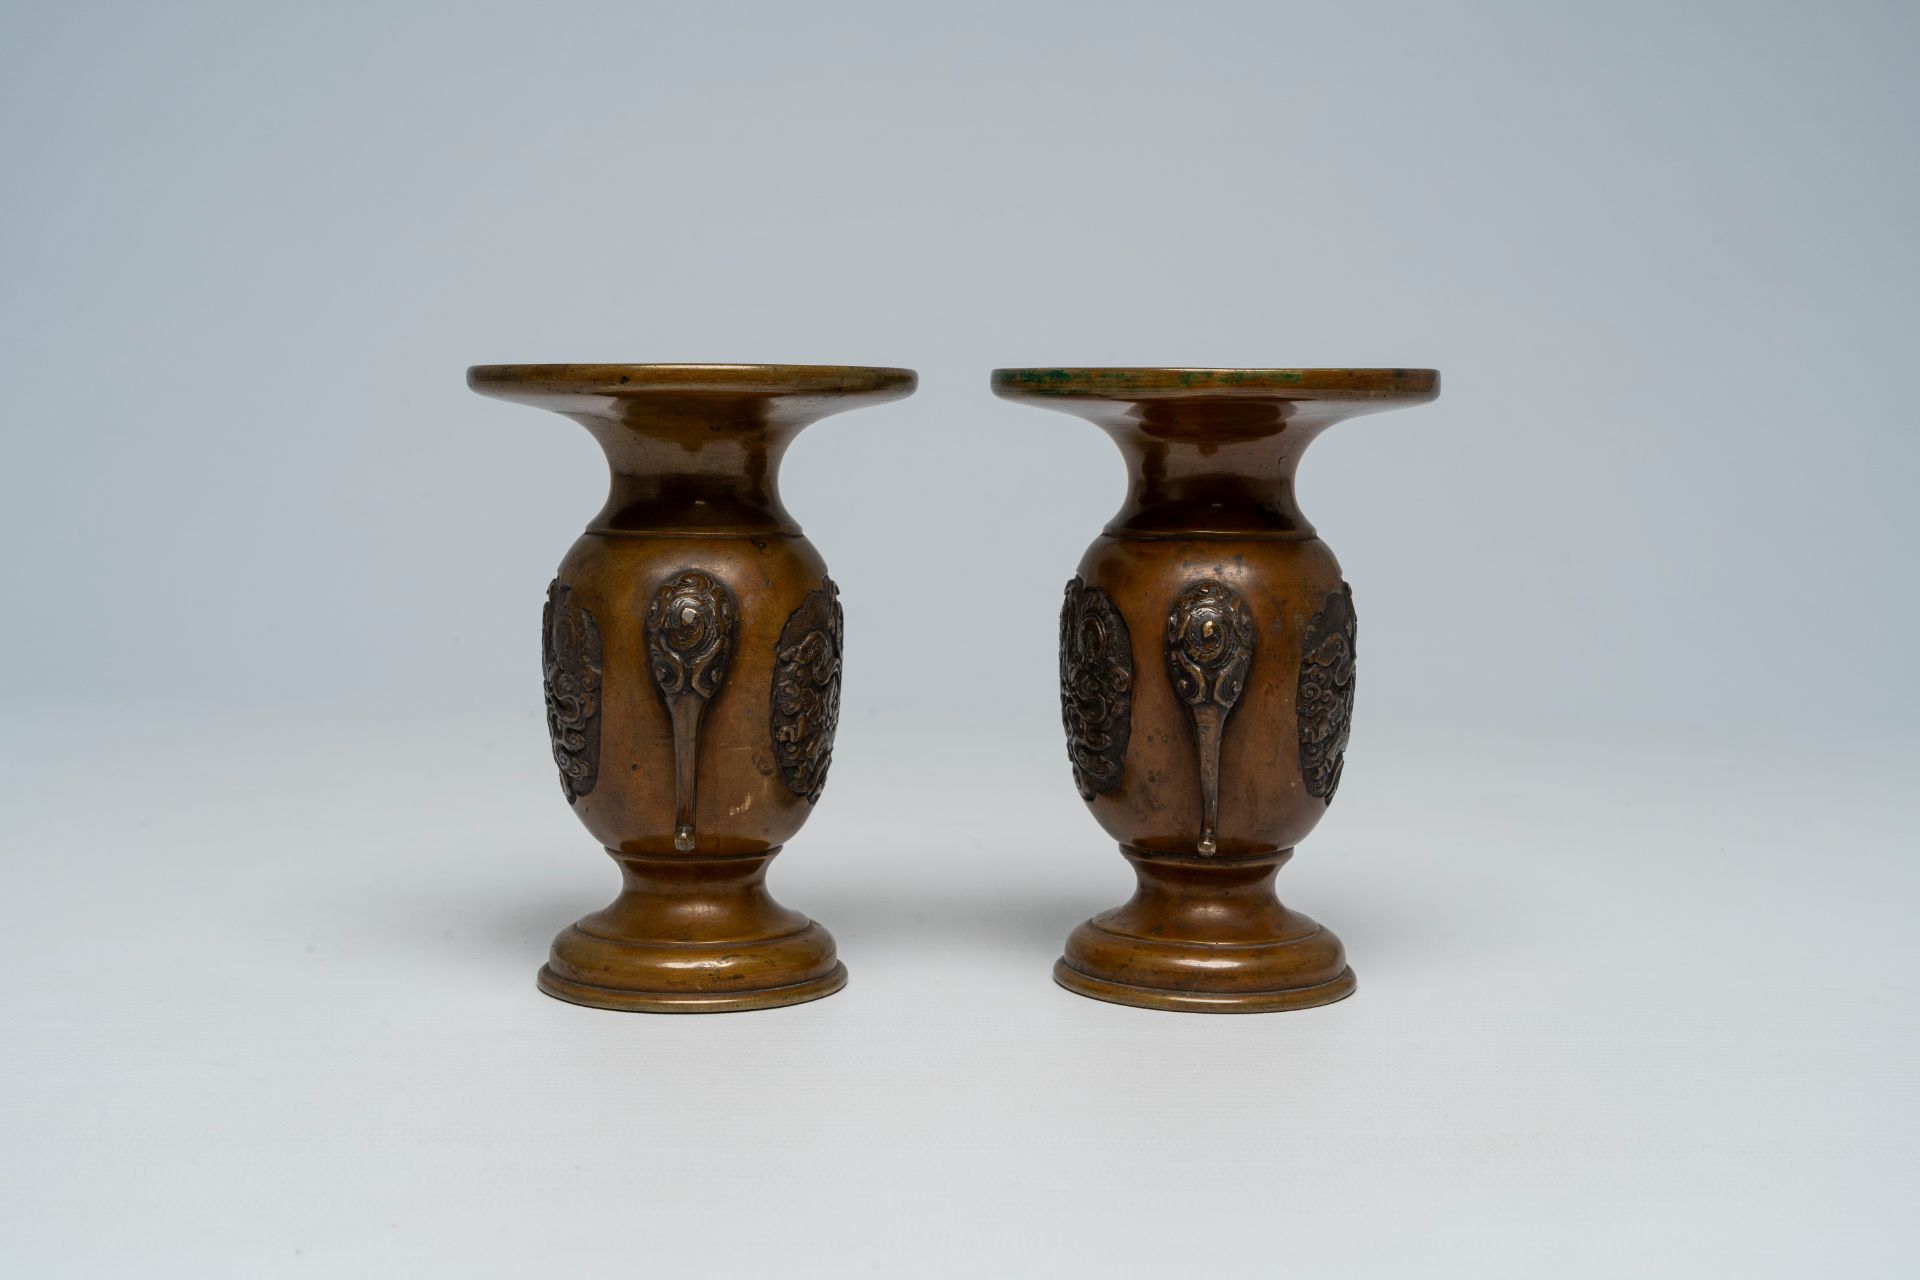 A pair of Japanese bronze vases, two mixed metal chargers with relief design, a blue and white dish - Image 19 of 21